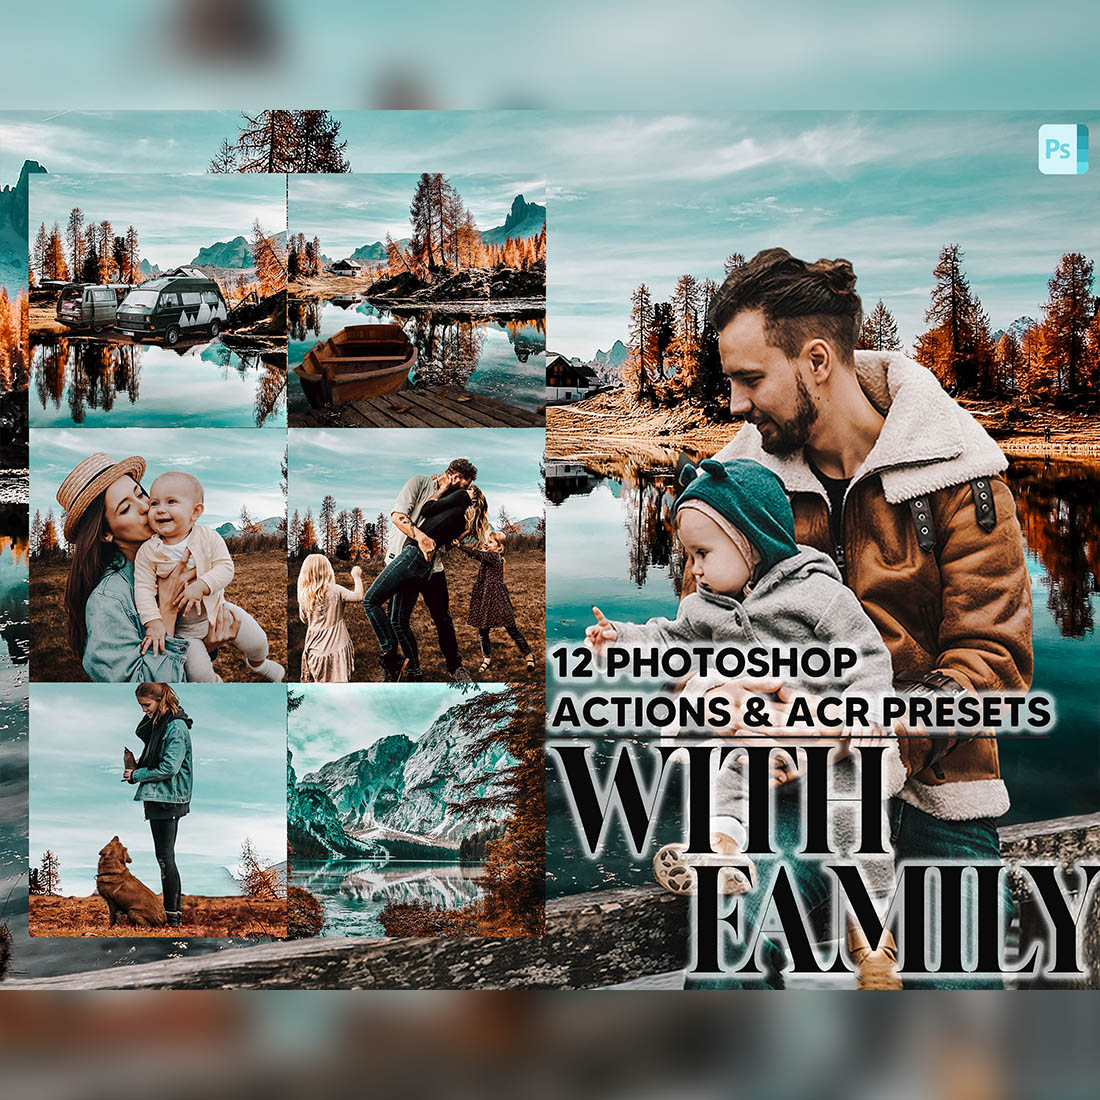 12 Photoshop Actions, With Family Ps Action, Nature ACR Preset, Moody Ps Filter, Atn Portrait And Lifestyle Theme Instagram, Blogger Travel cover image.